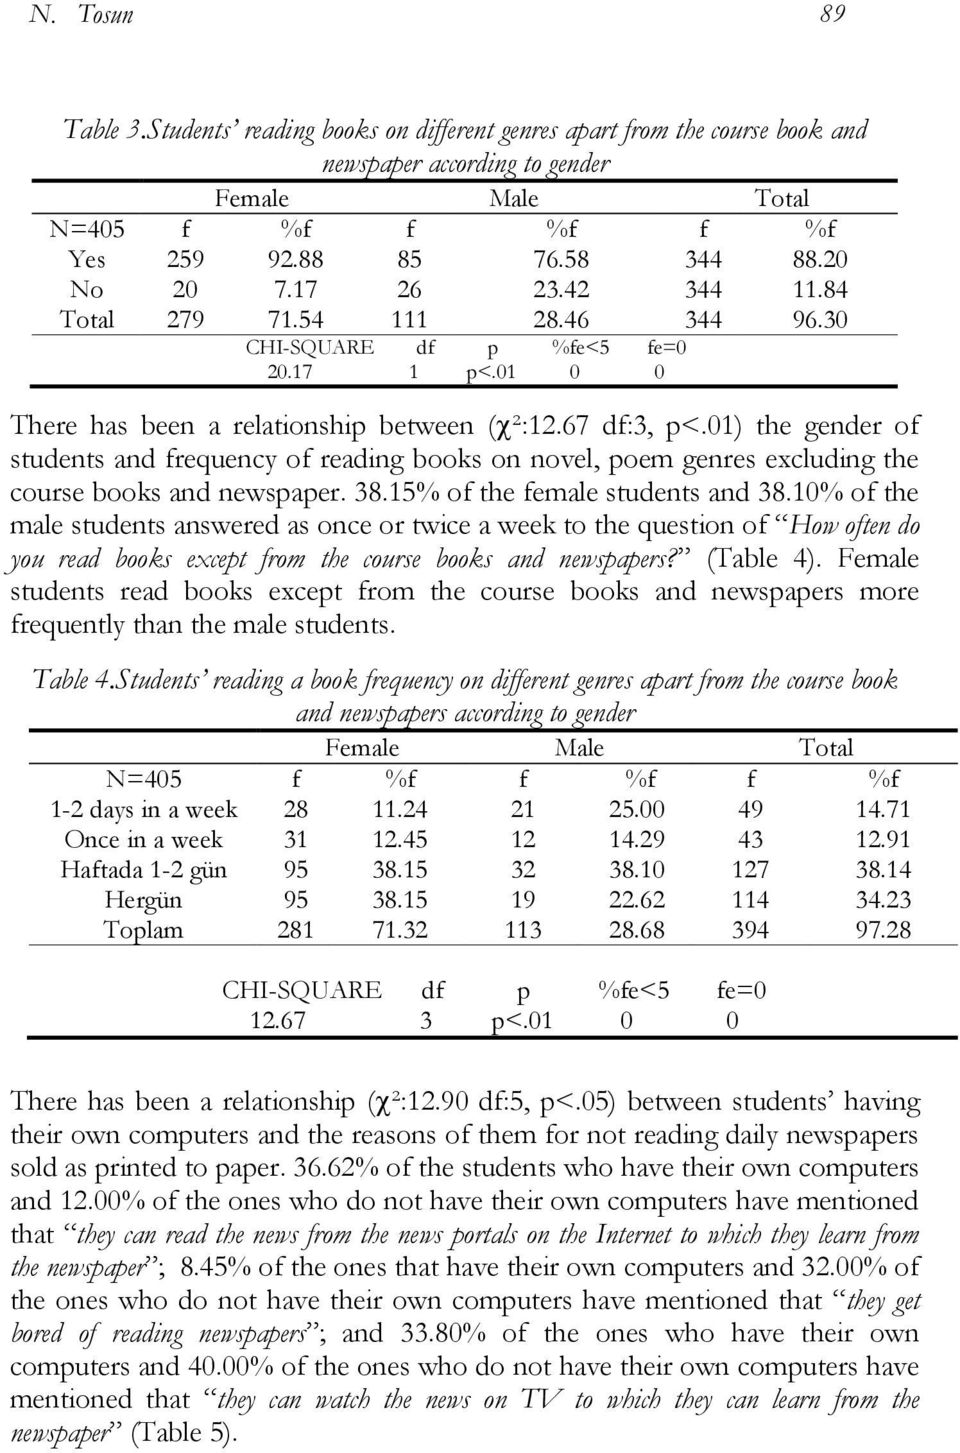 01) the gender of students and frequency of reading books on novel, poem genres excluding the course books and newspaper. 38.15% of the female students and 38.